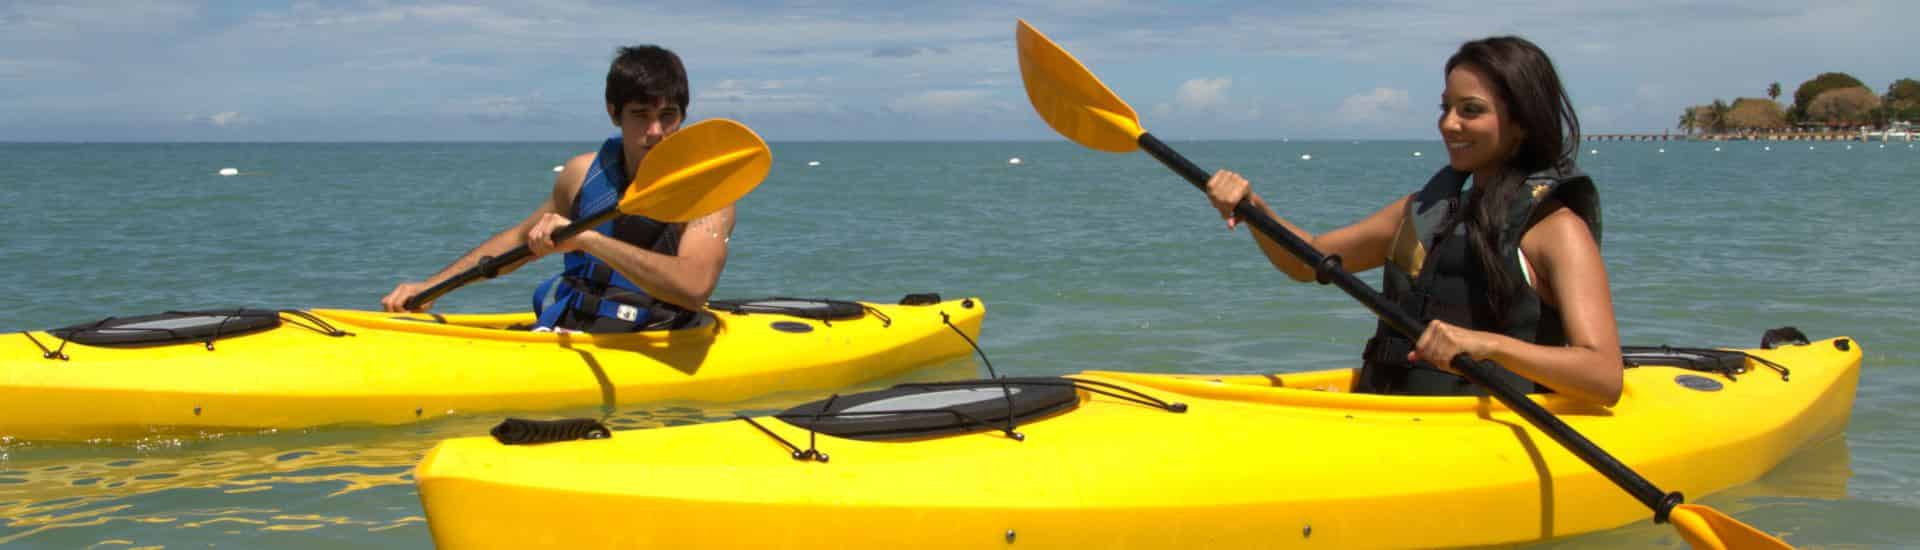 Two people on two yellow kayaks floating on blueish green water